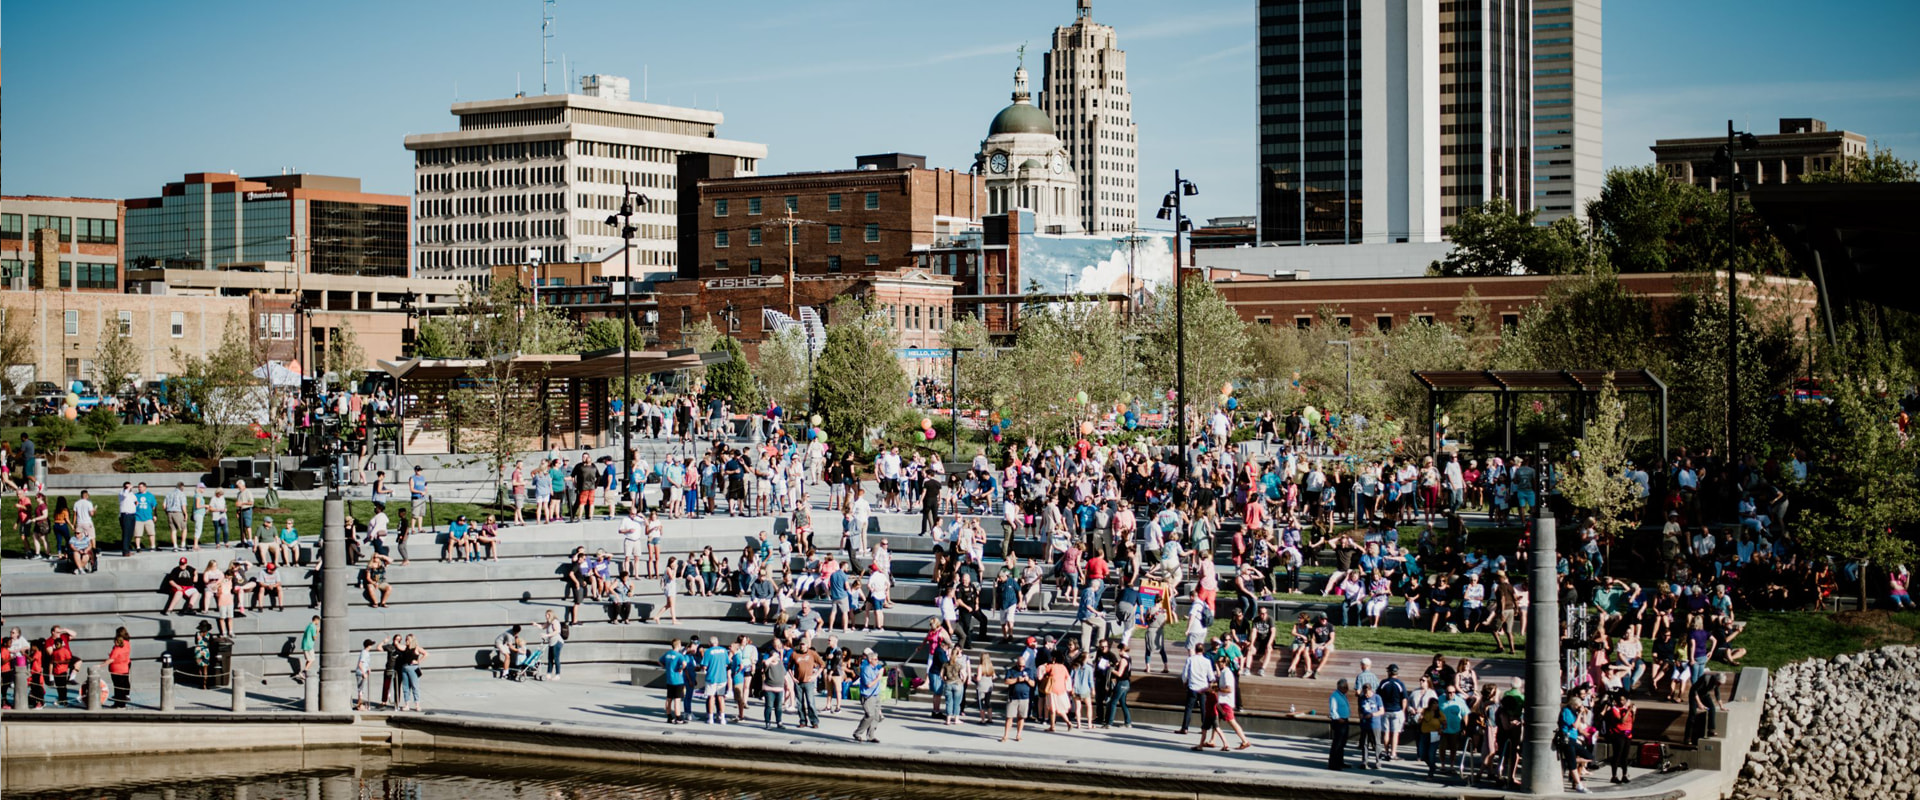 Is fort wayne a great place to live?